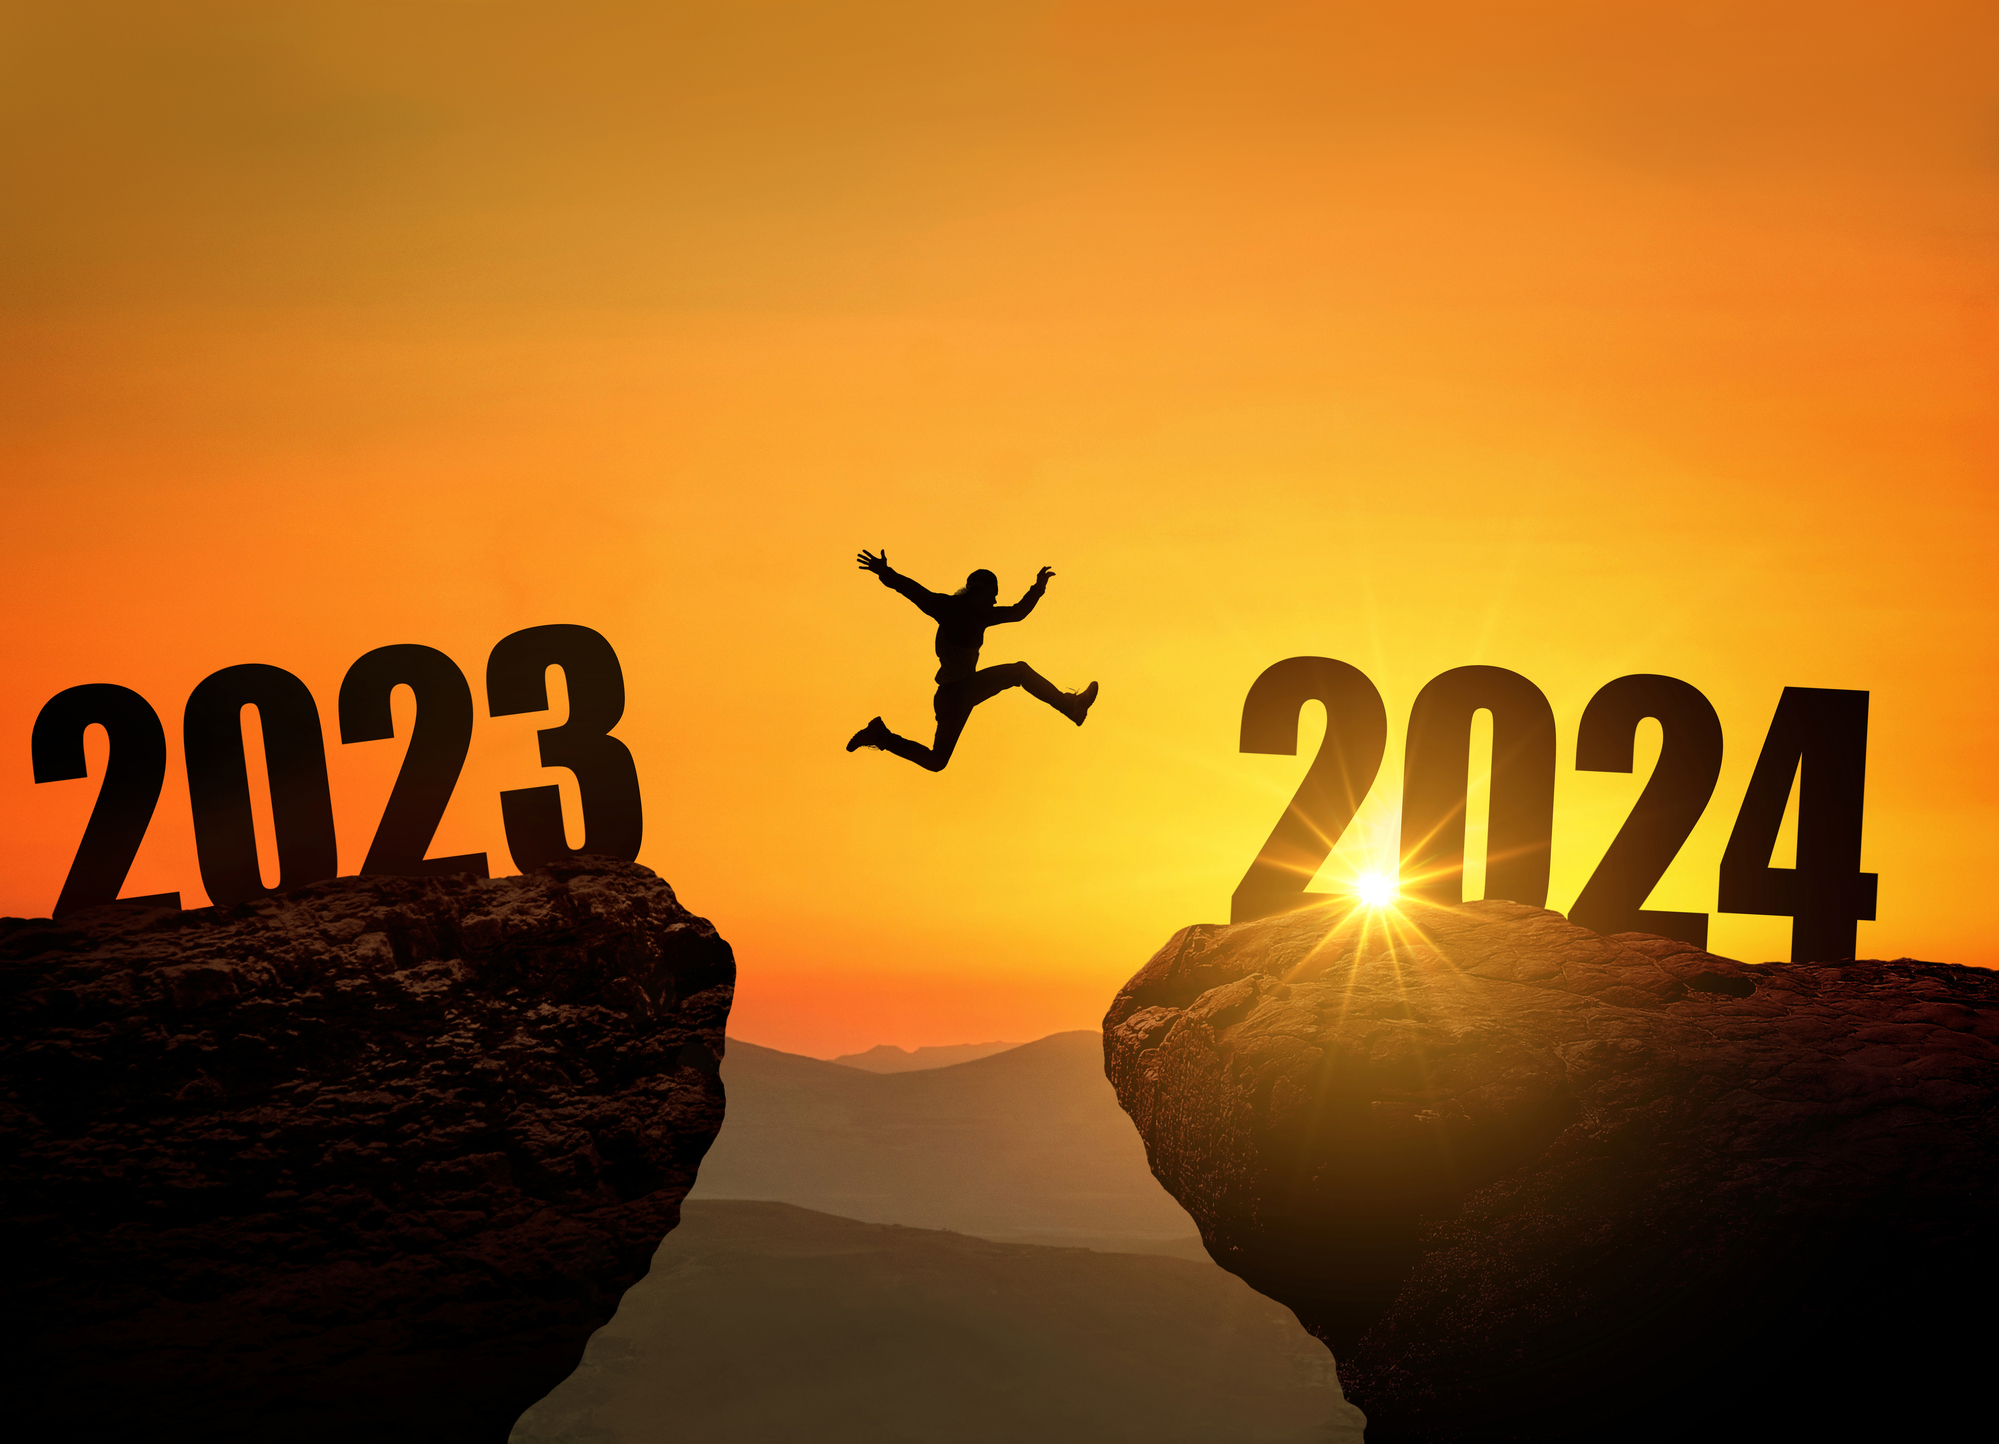 Man jumping on cliff 2024 over the precipice at amazing sunset. New Year's concept. Symbol of starting and welcome happy new year 2024. People enters the year 2024, creative idea